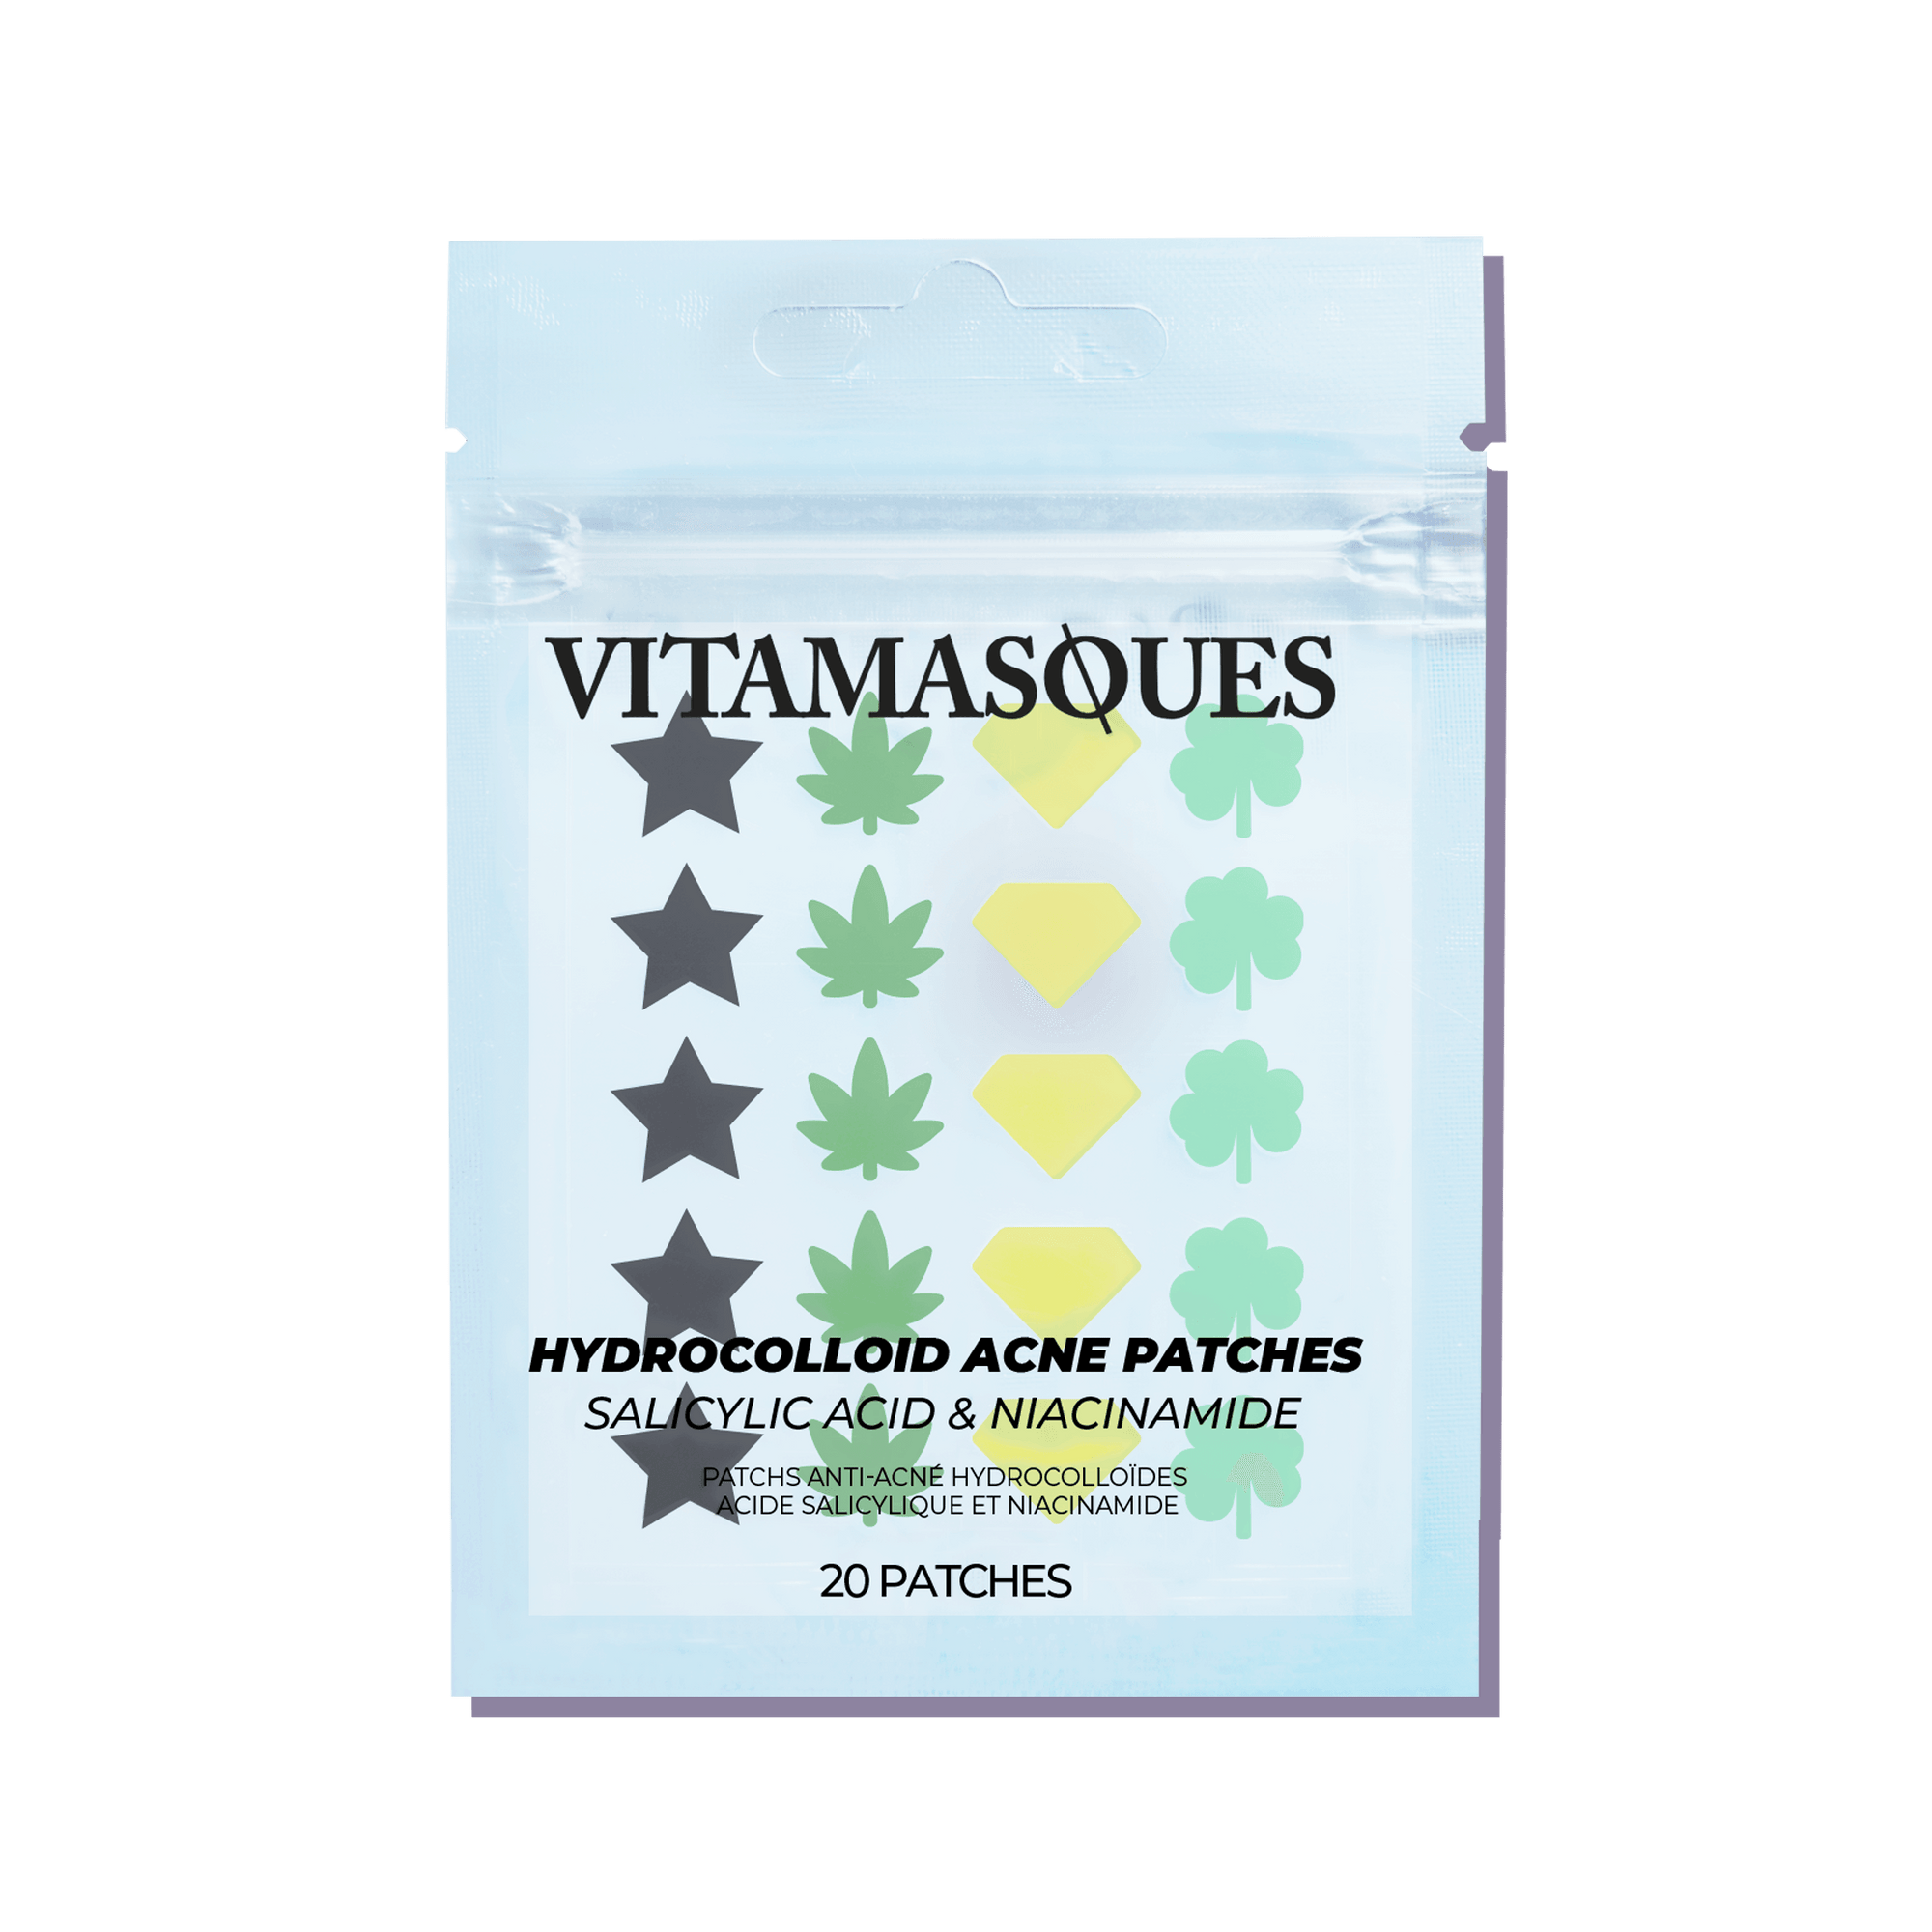 Hydrocolloid Acne Patches Salicylic & Niacinamide - Vitamasques